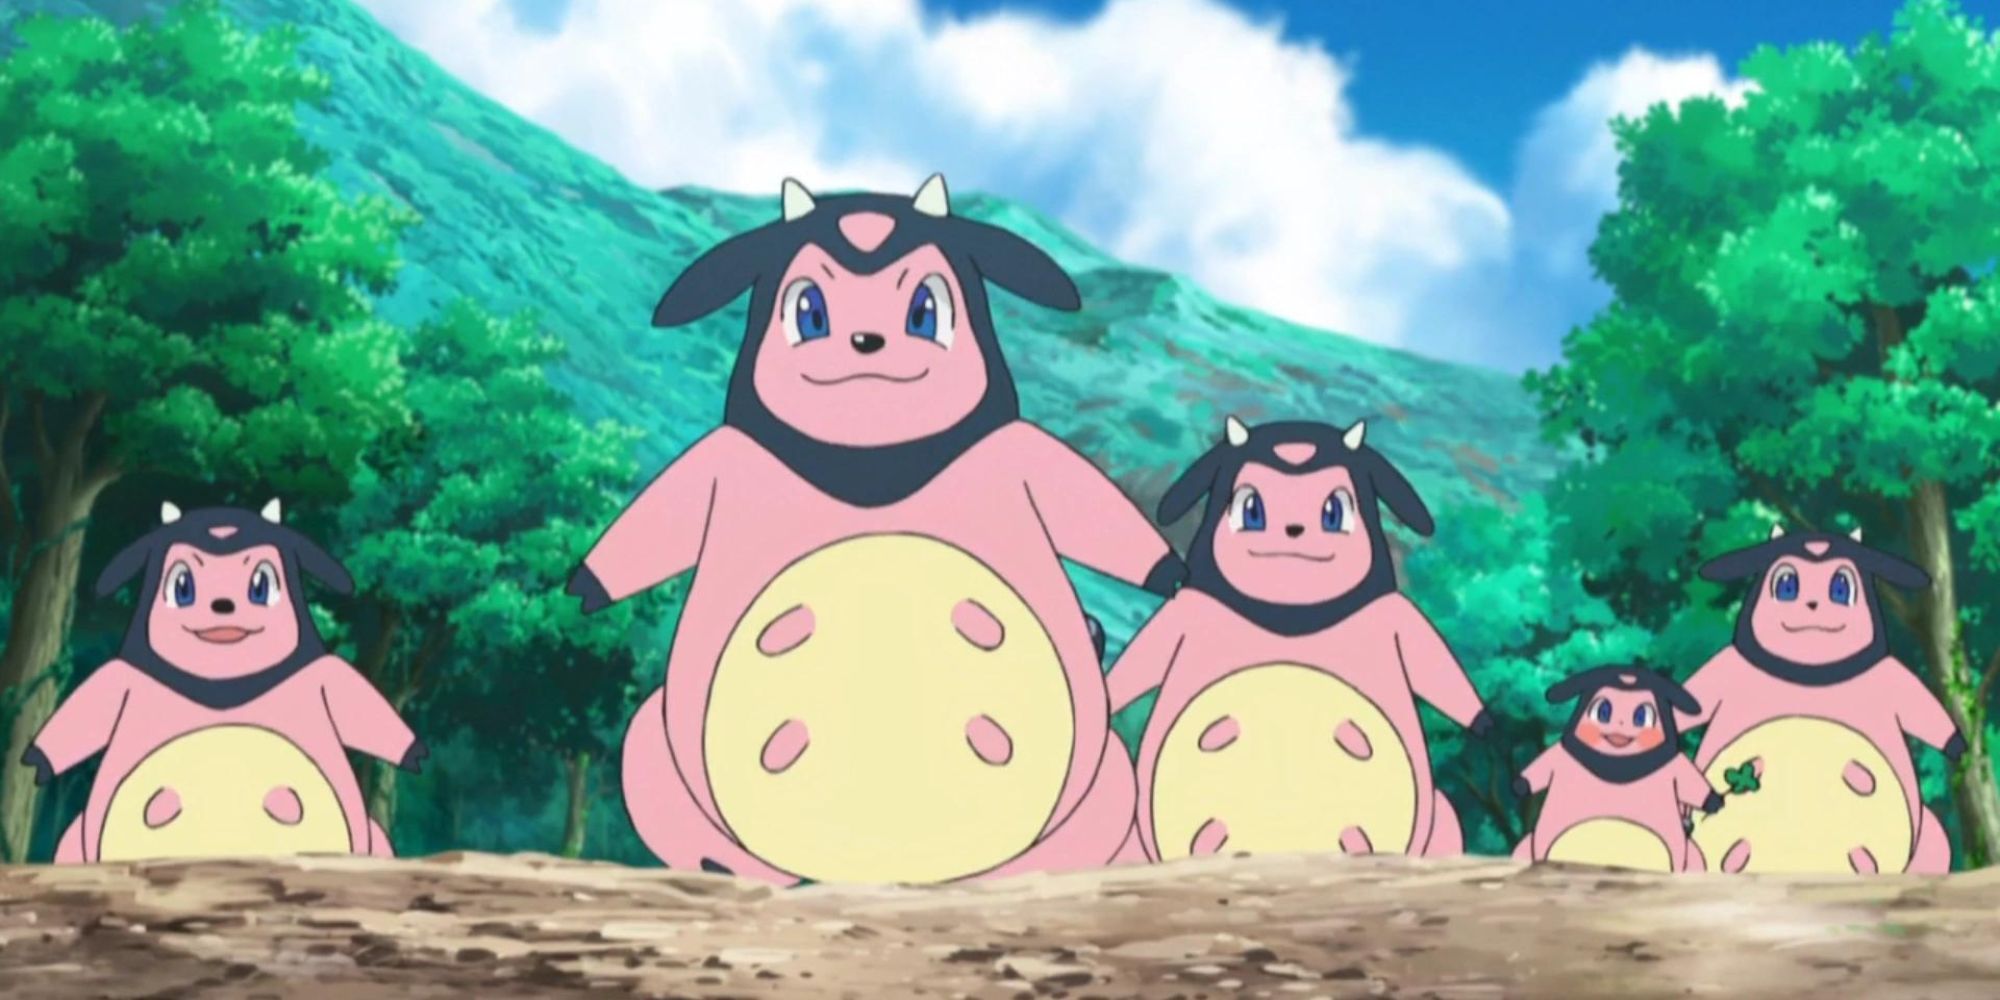 A group of Miltank walk down a dirt path together